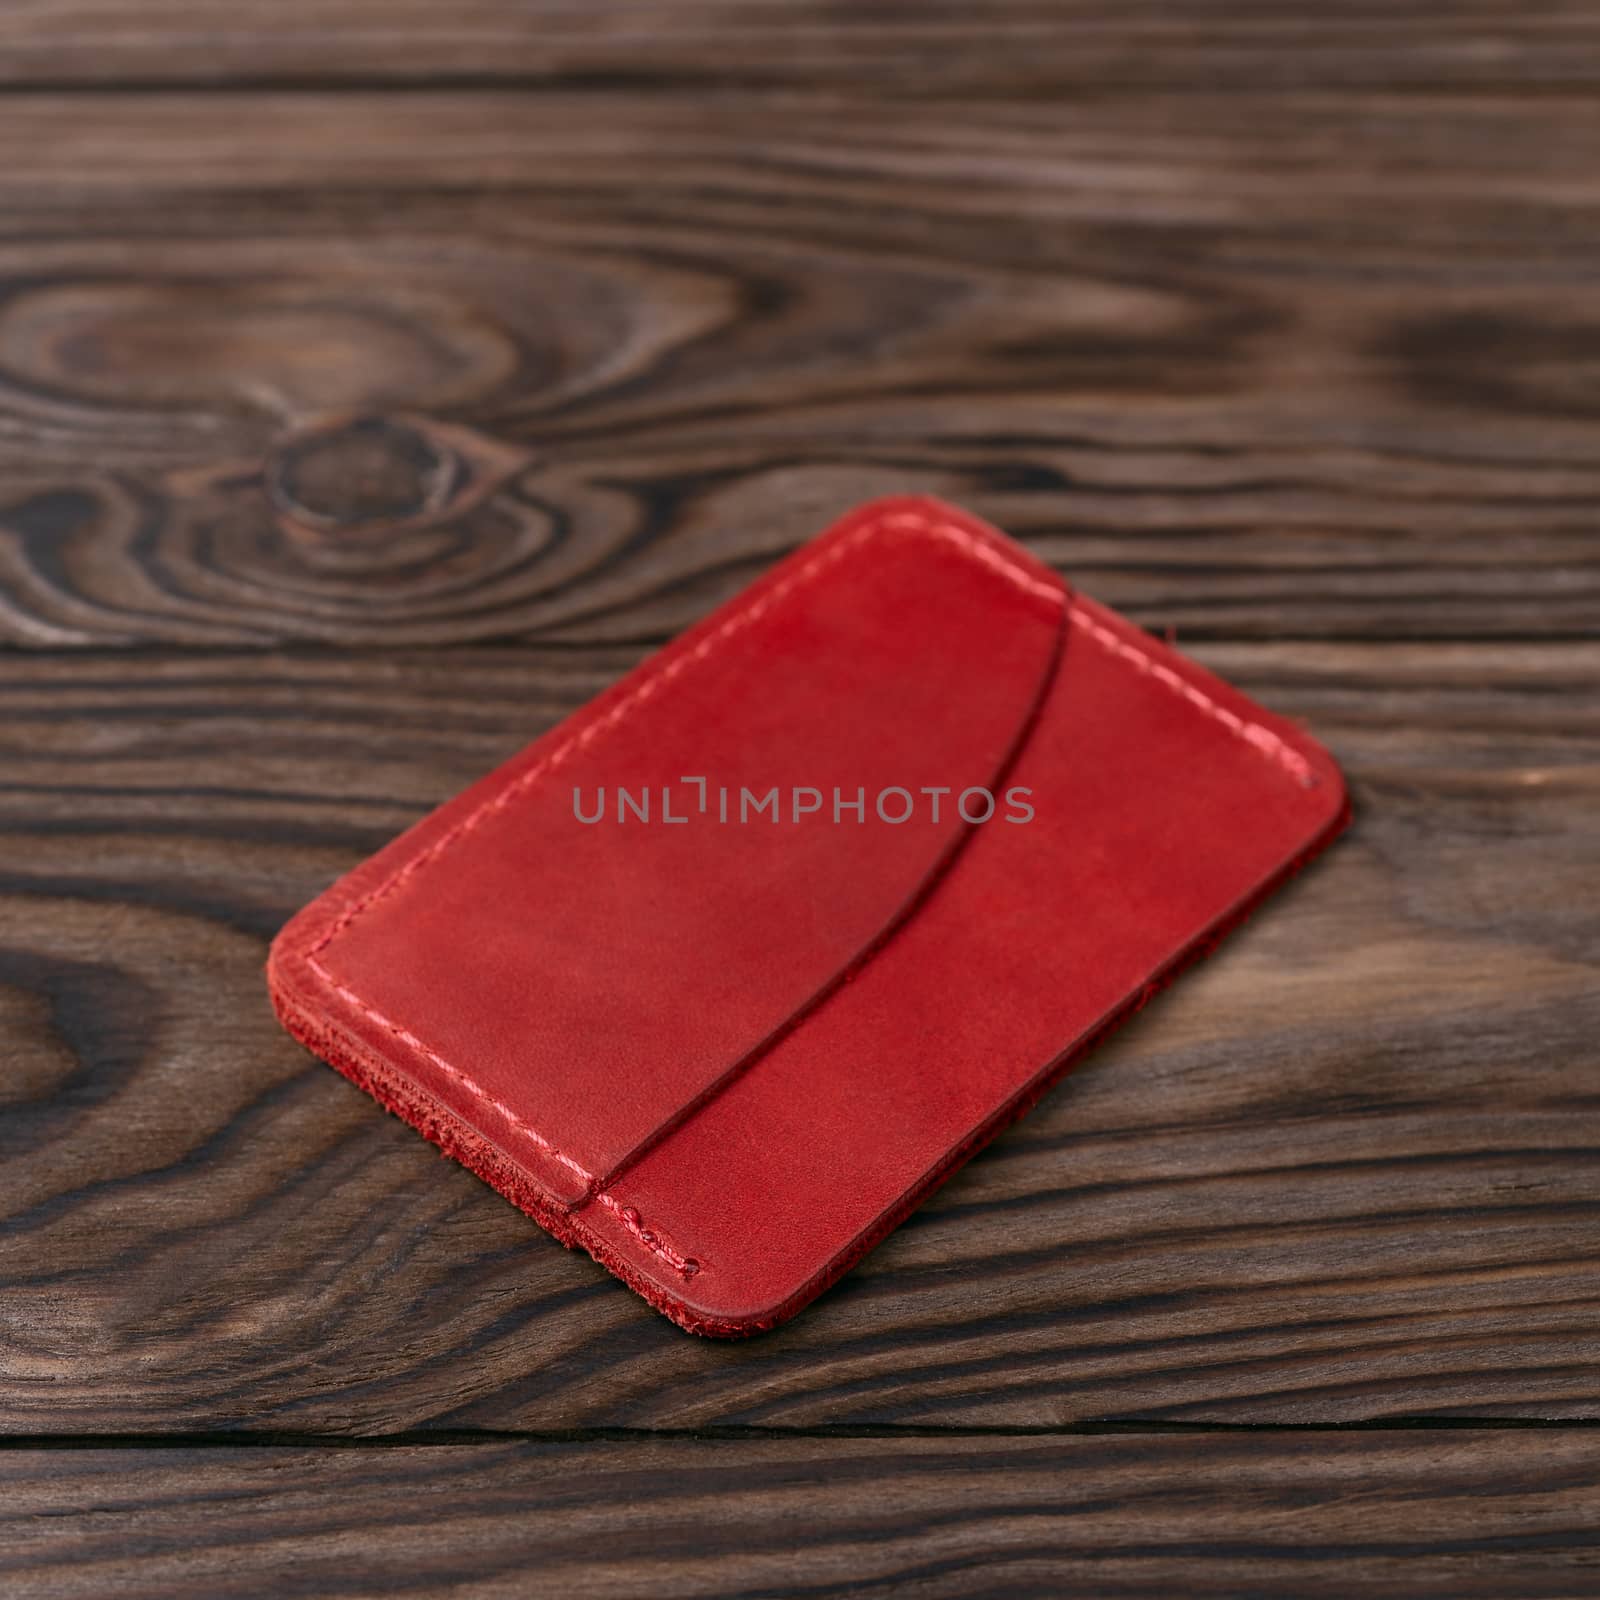 Red colour handmade leather one pocket cardholder on wooden background. Stock photo with soft blurred background. by alexsdriver